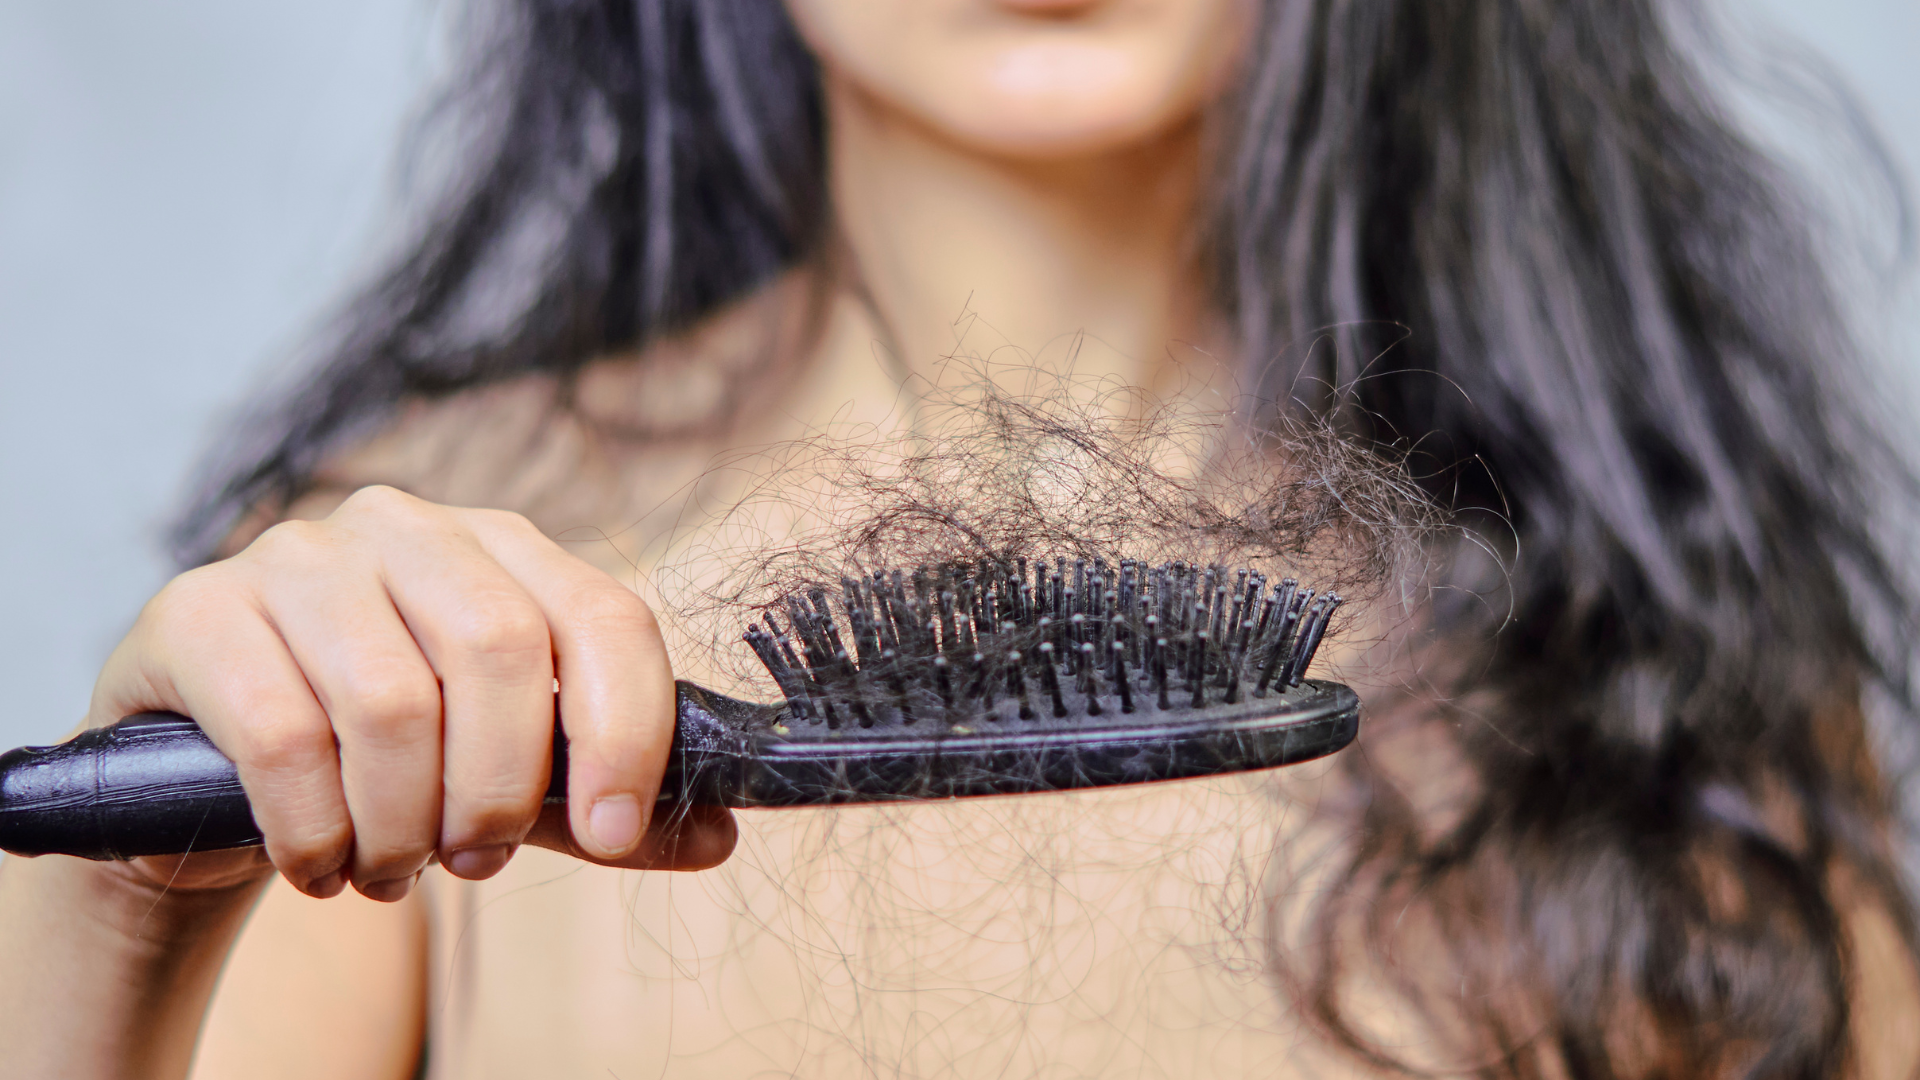 Hair Loss: What is It, Causes, Treatments, and When to Be Concerned